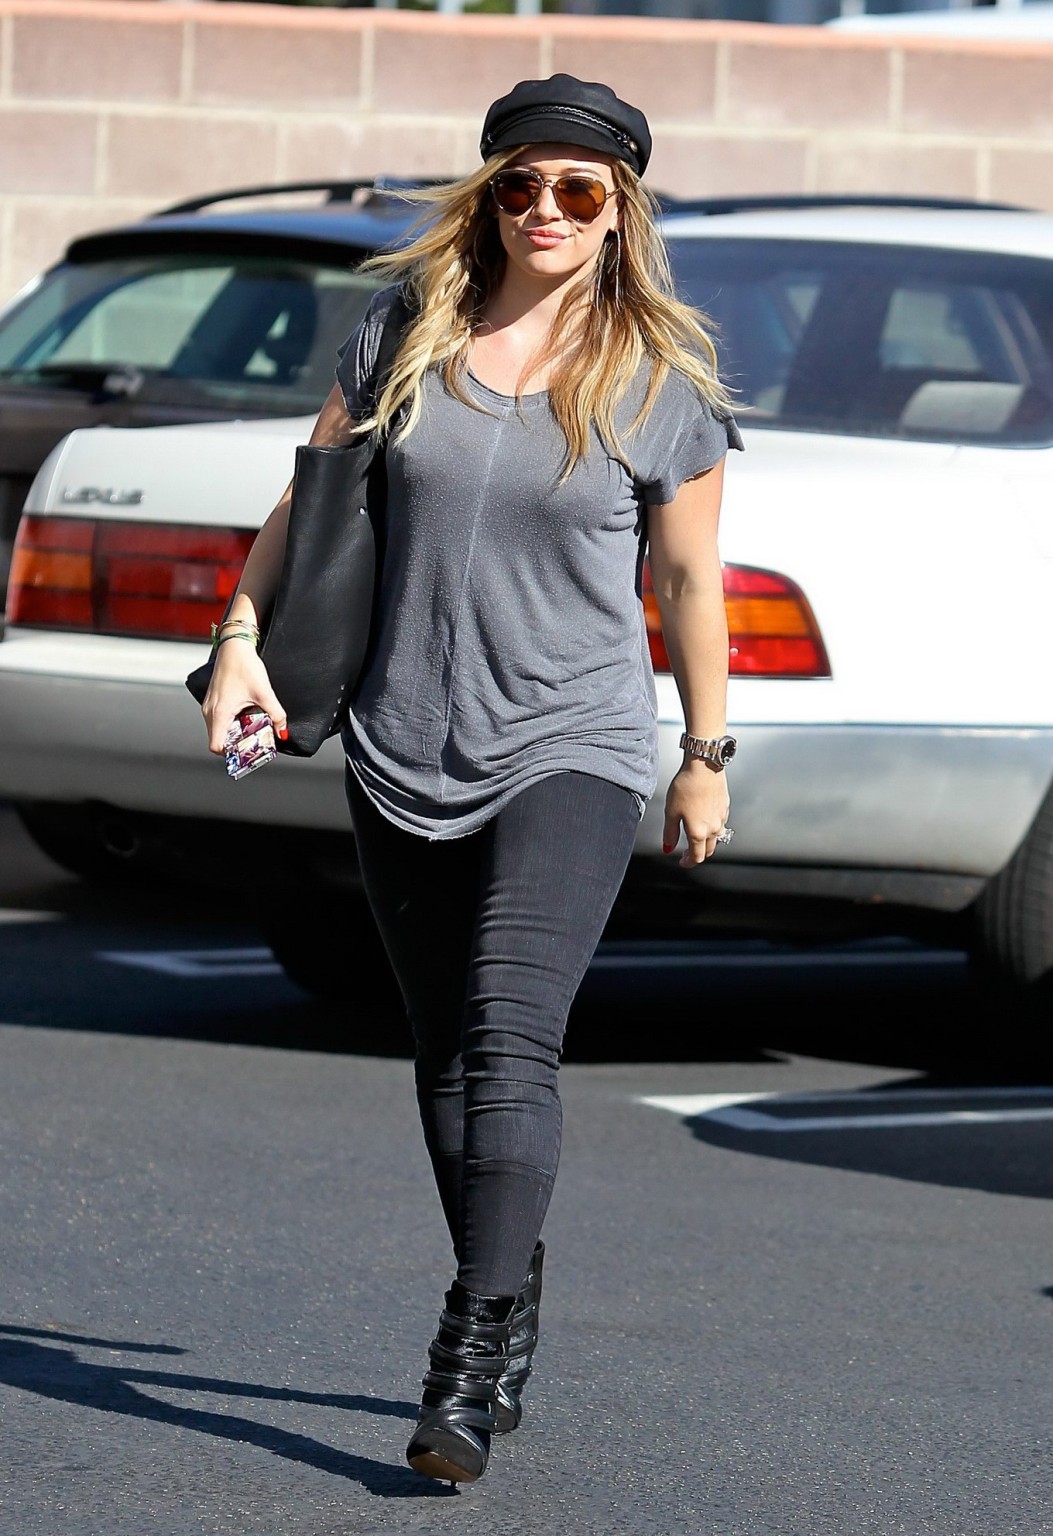 Hilary Duff showing hard pokies in a gray top and tight jeans out in Santa Monic #75213795